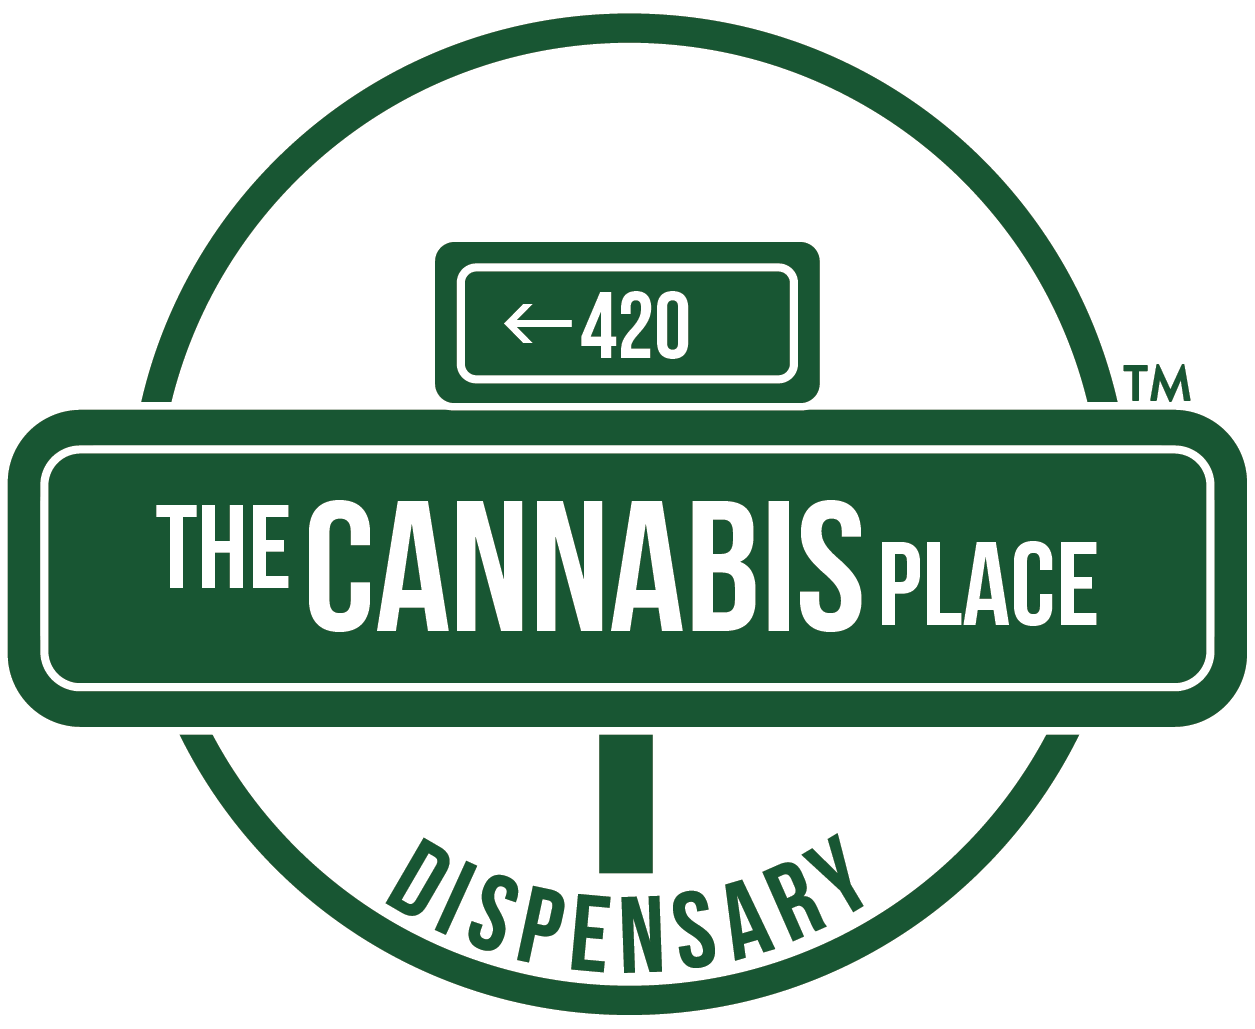 The Cannabis Place.logo.png